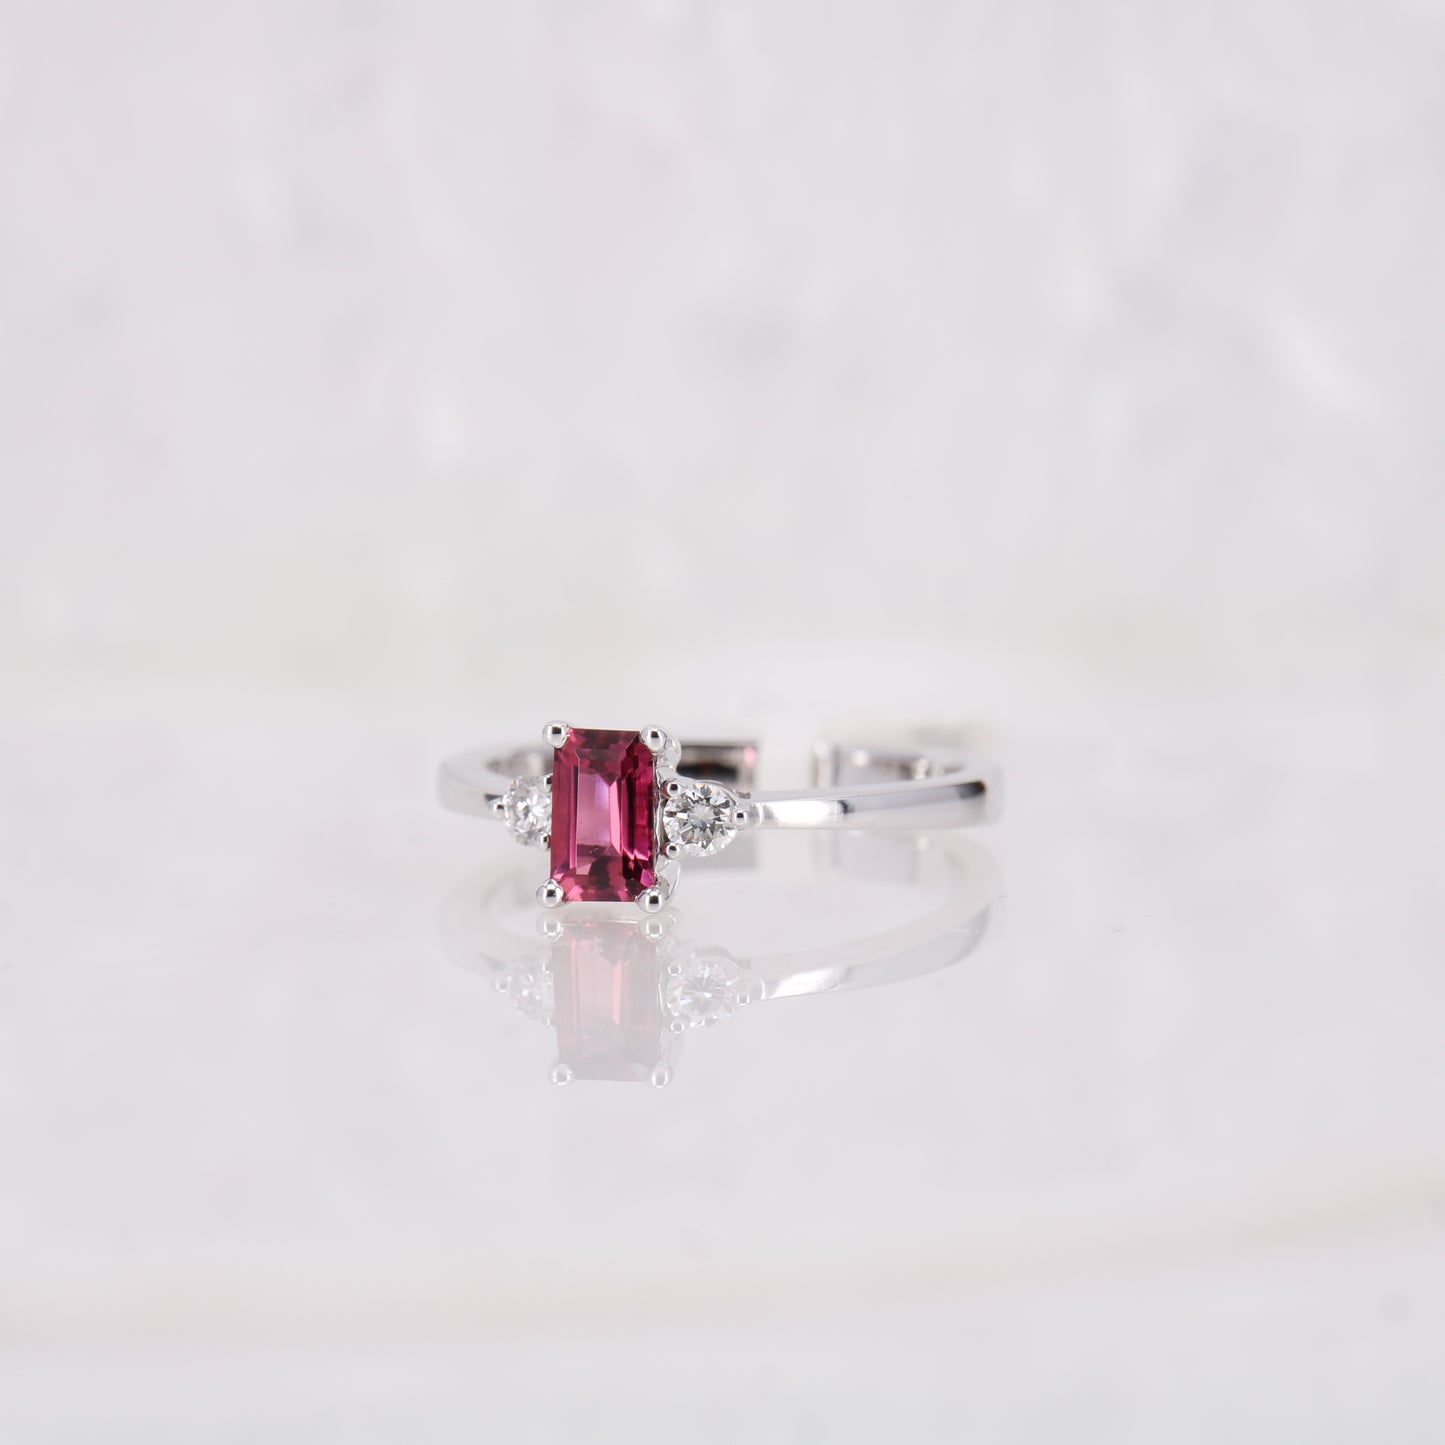 Pink Tourmaline and Diamond Ring. Set in 18ct white gold. 